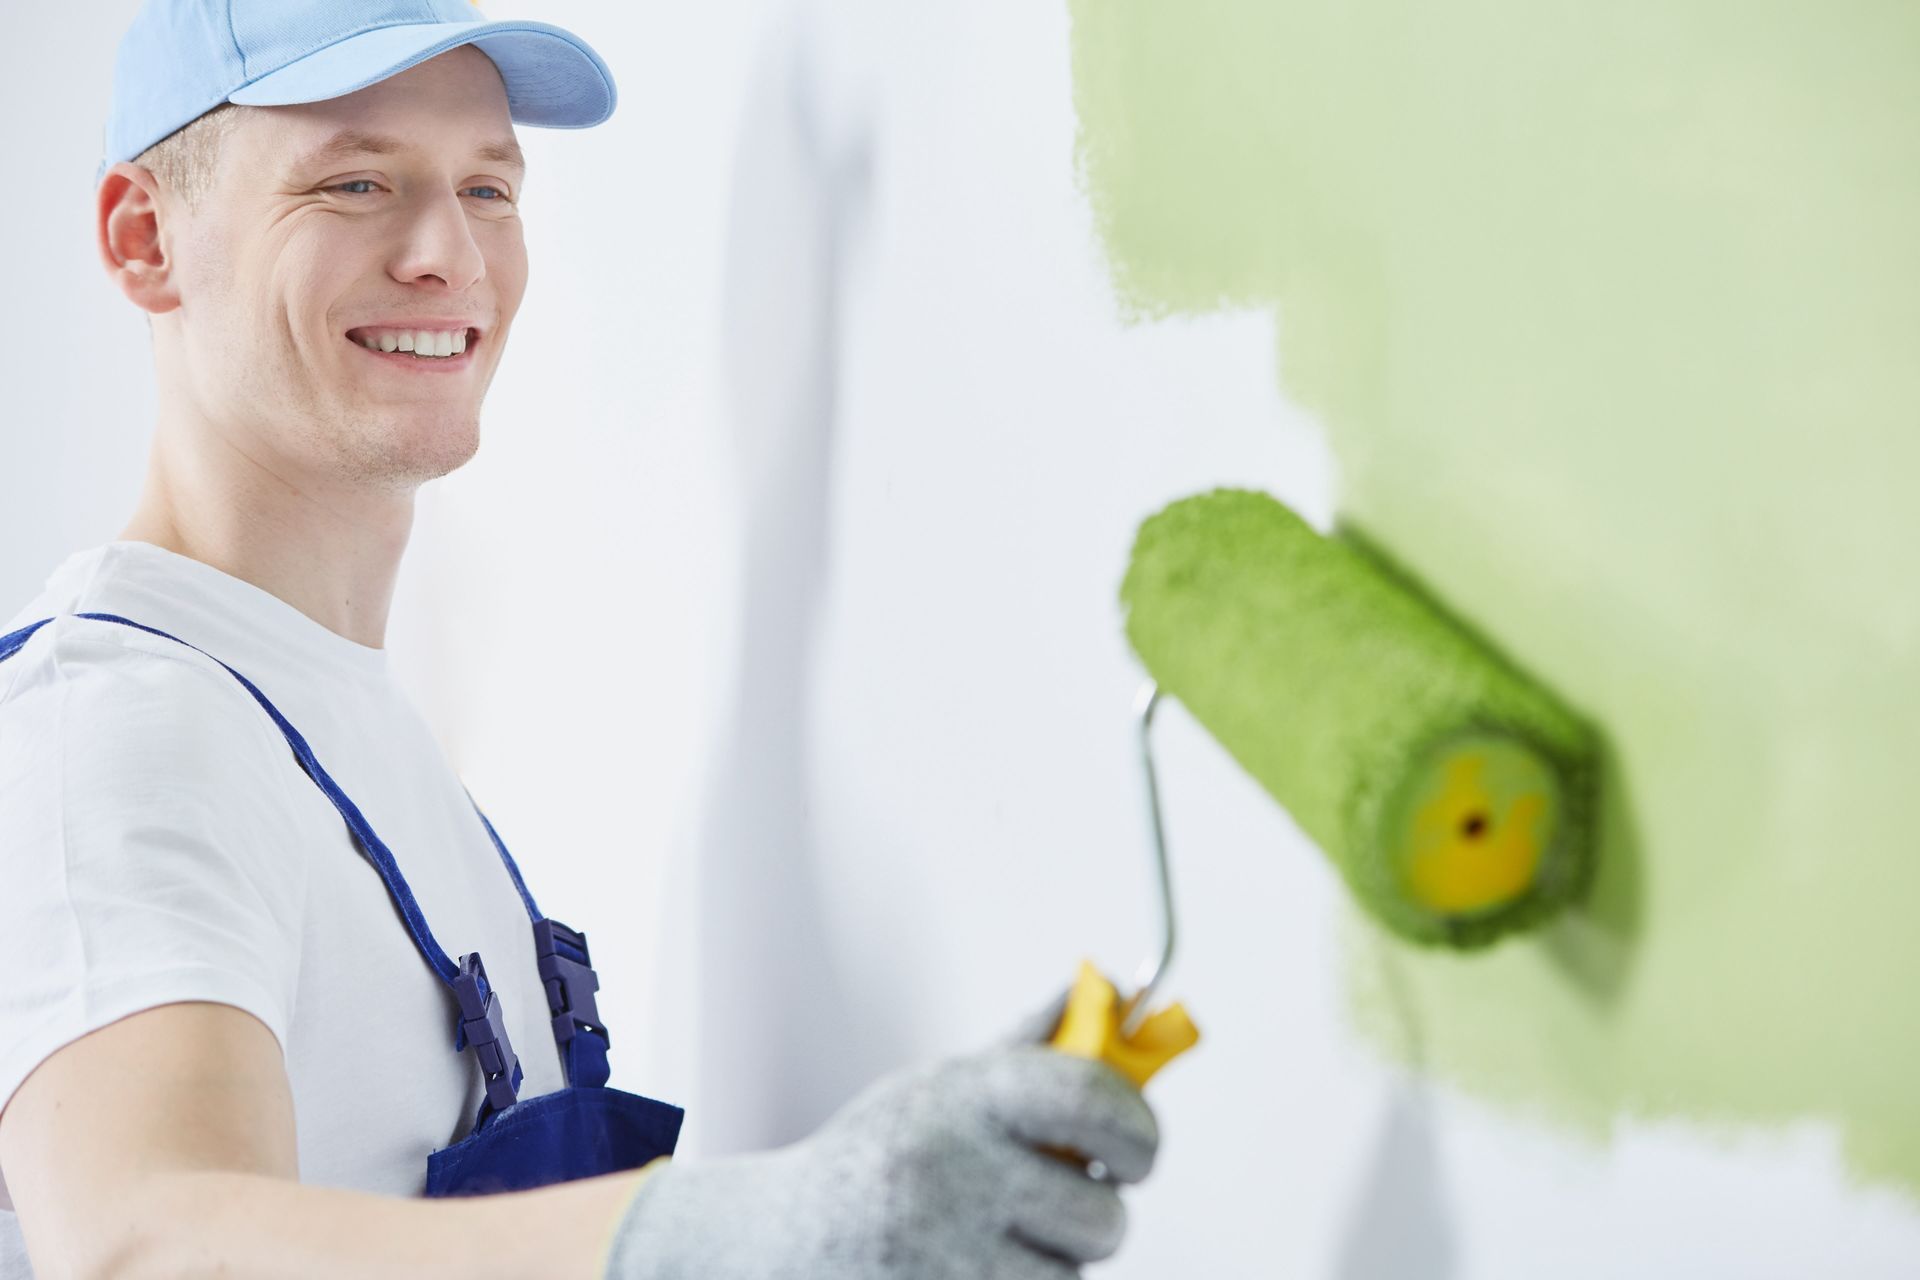 Home Painting Service